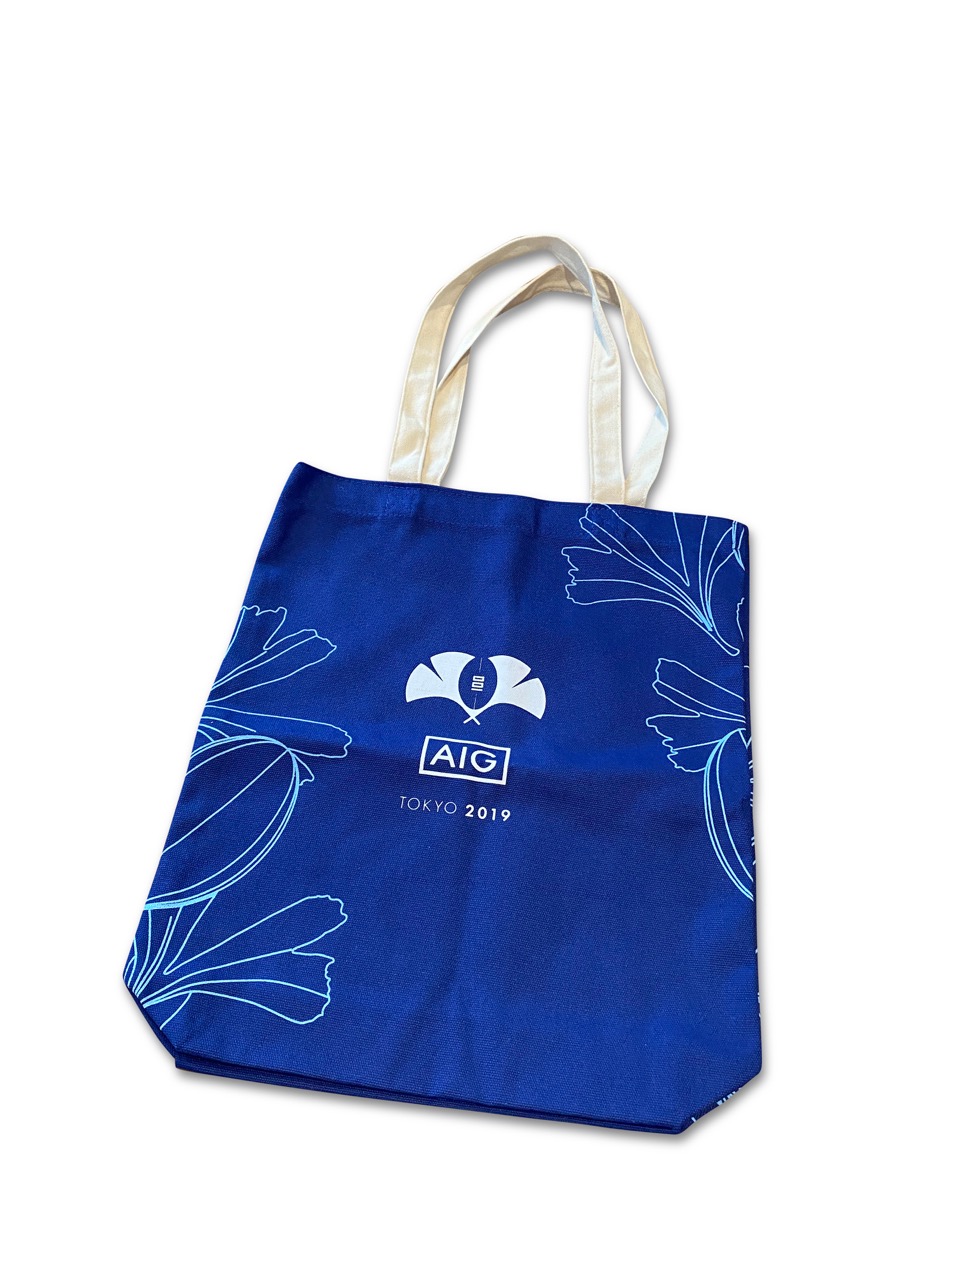 AIG RWC Merch and Apparel Withers and co Tote Bag1 v2